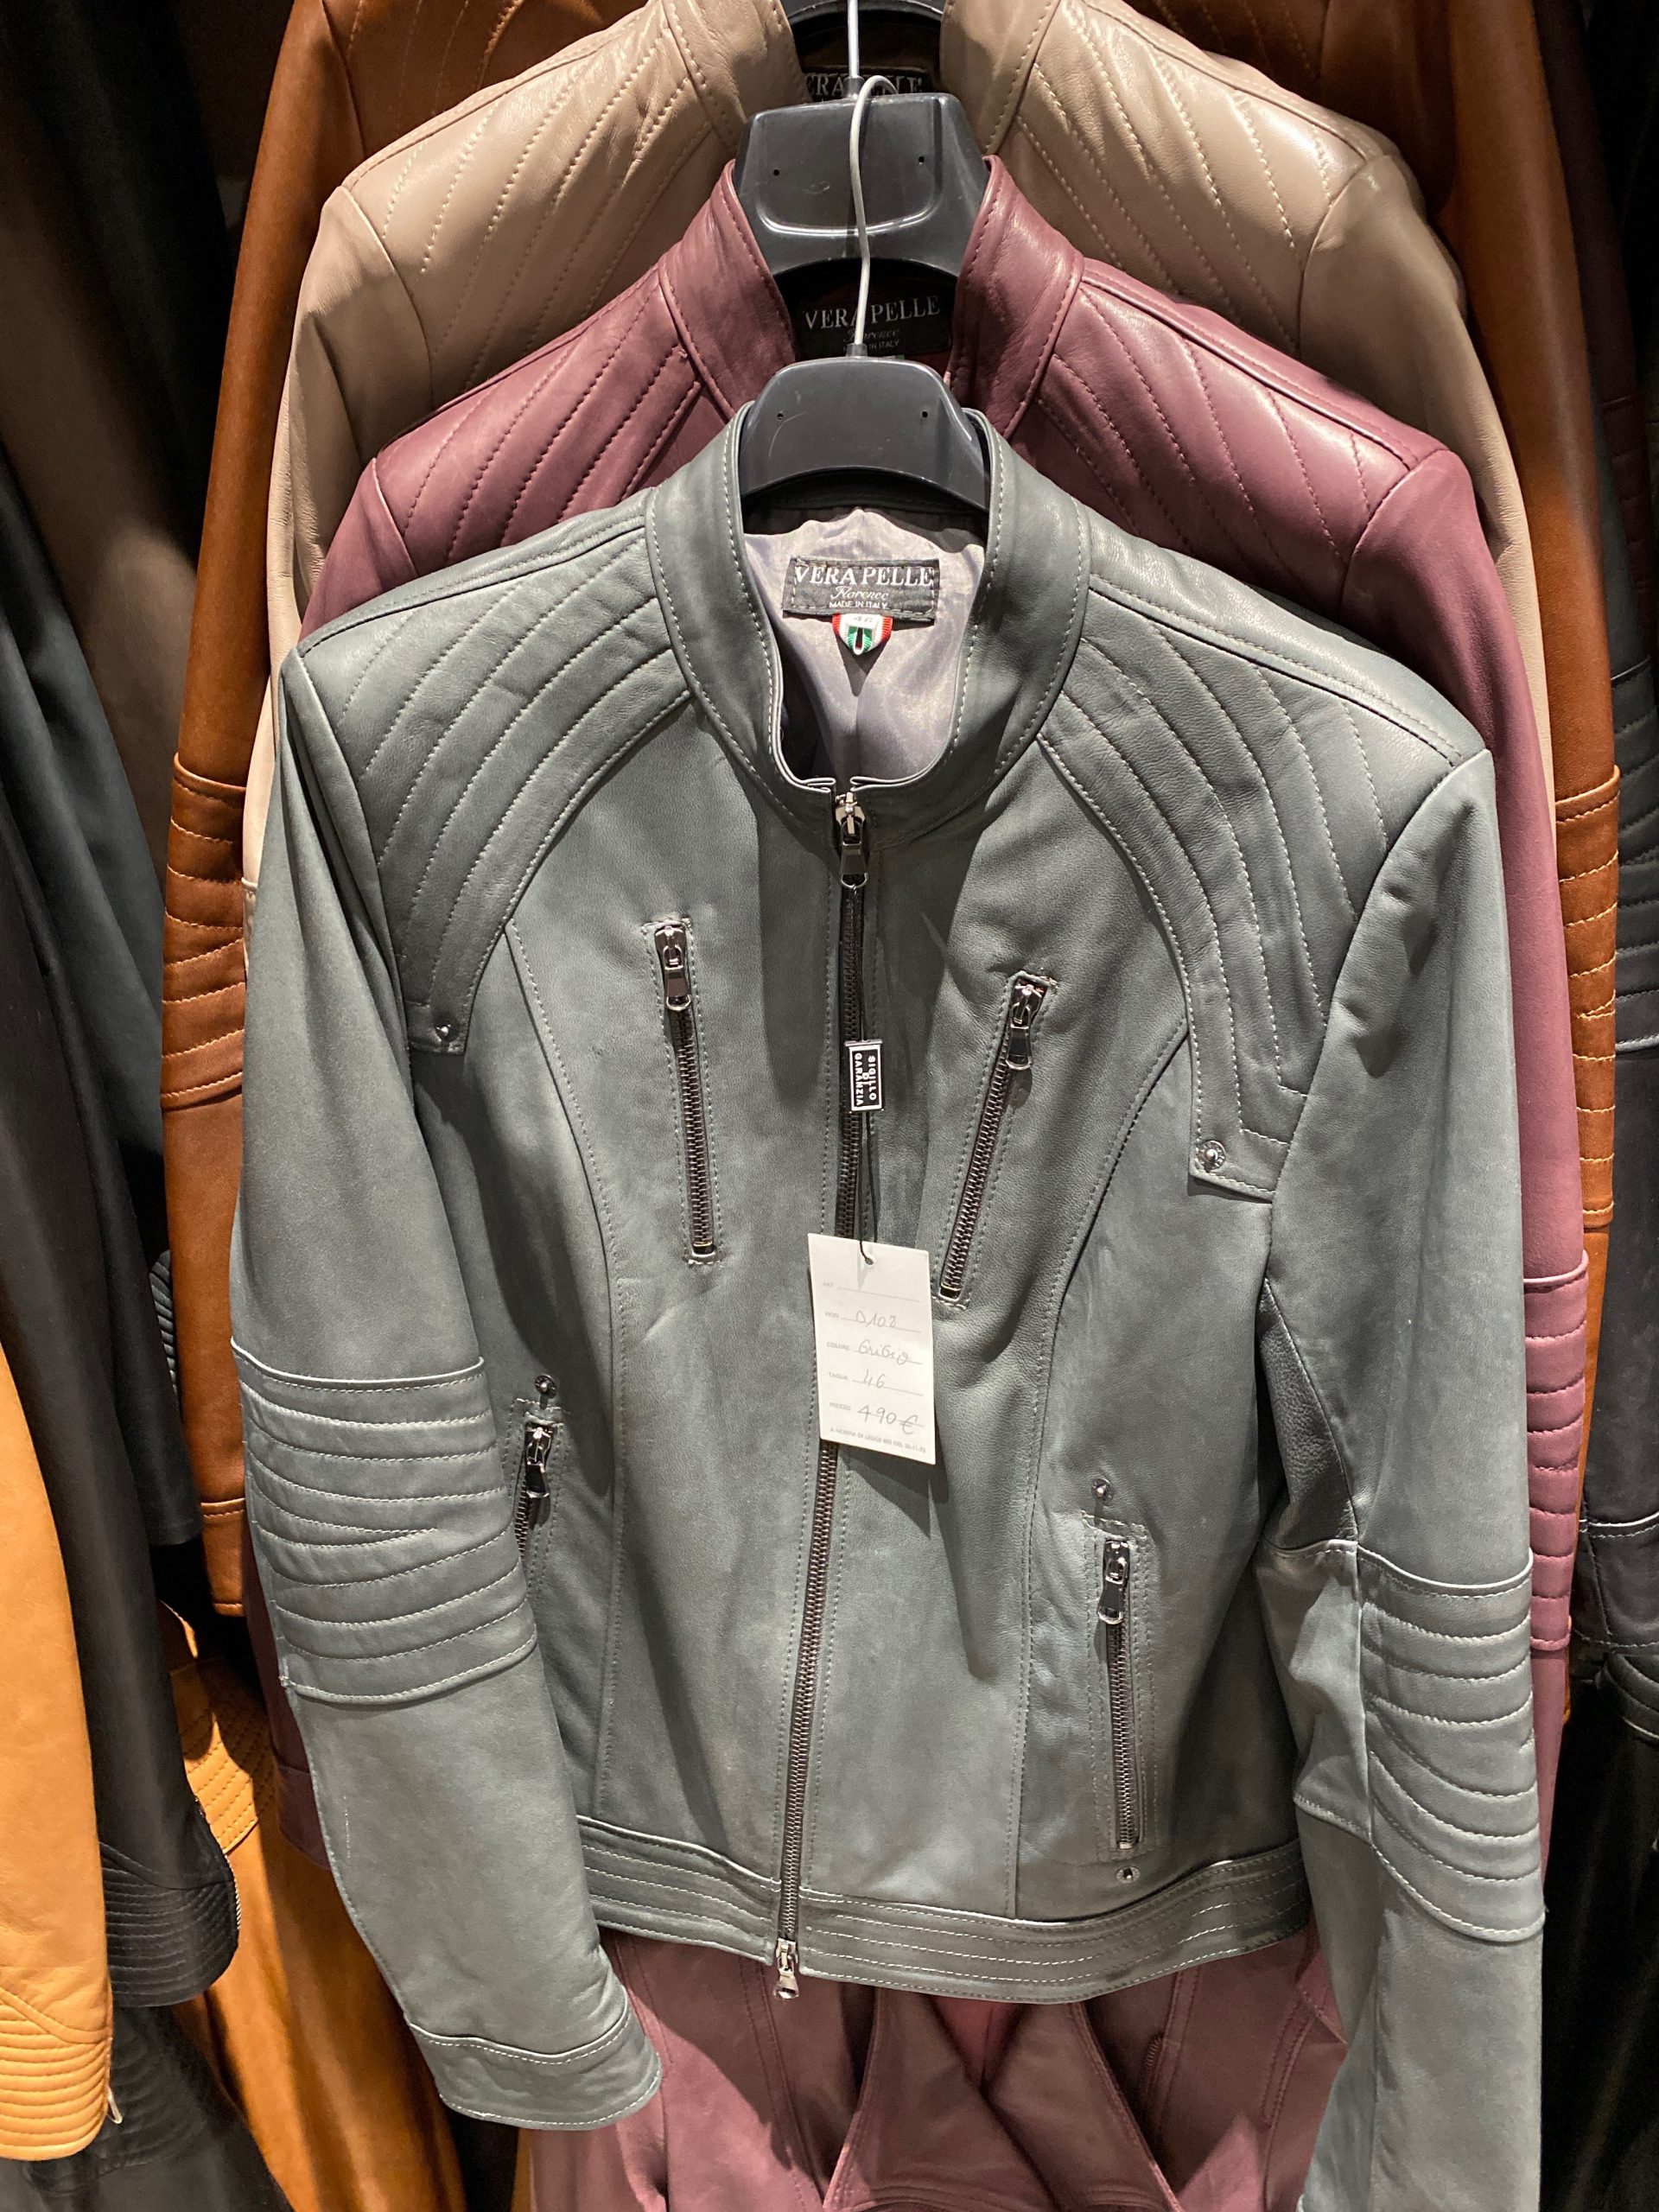 6 Italian Leather Jacket Brands You NEED To Know About | IsuiT